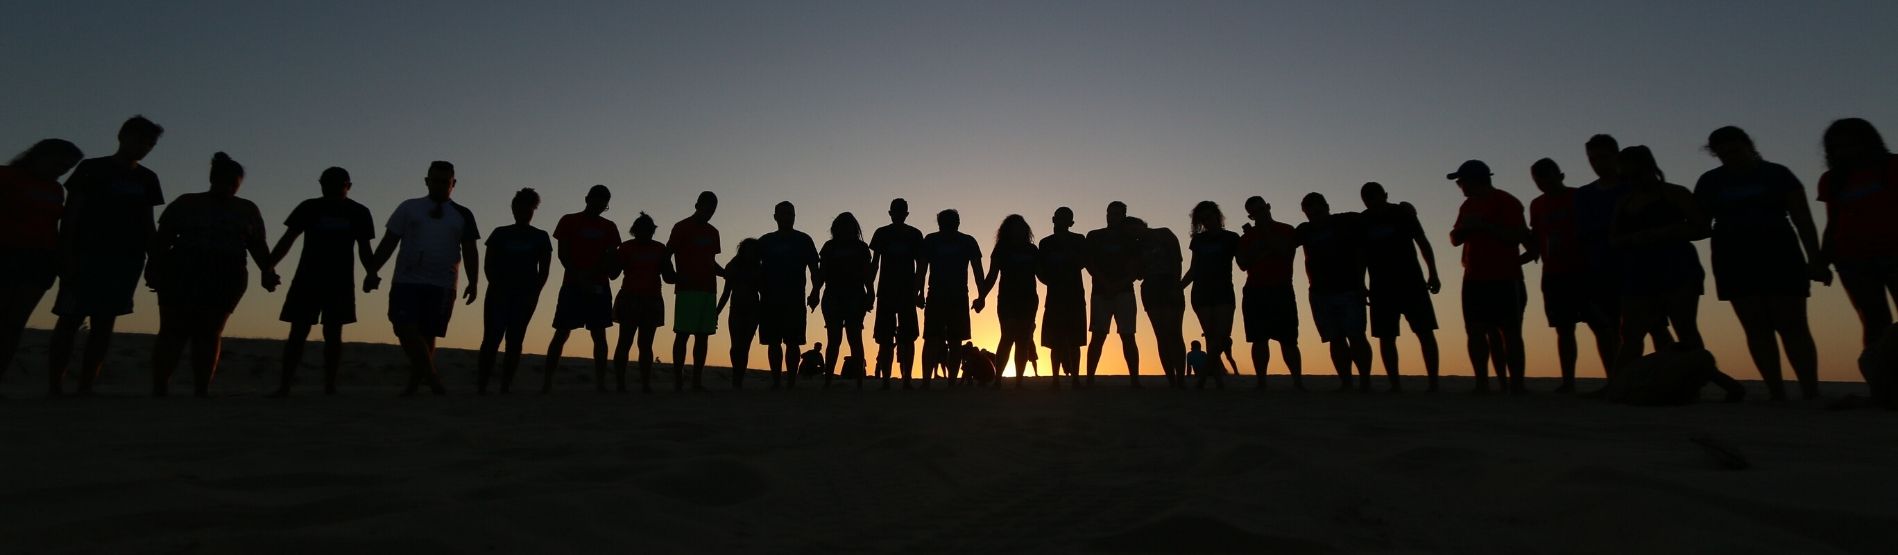 line of people holding hands in a sunset